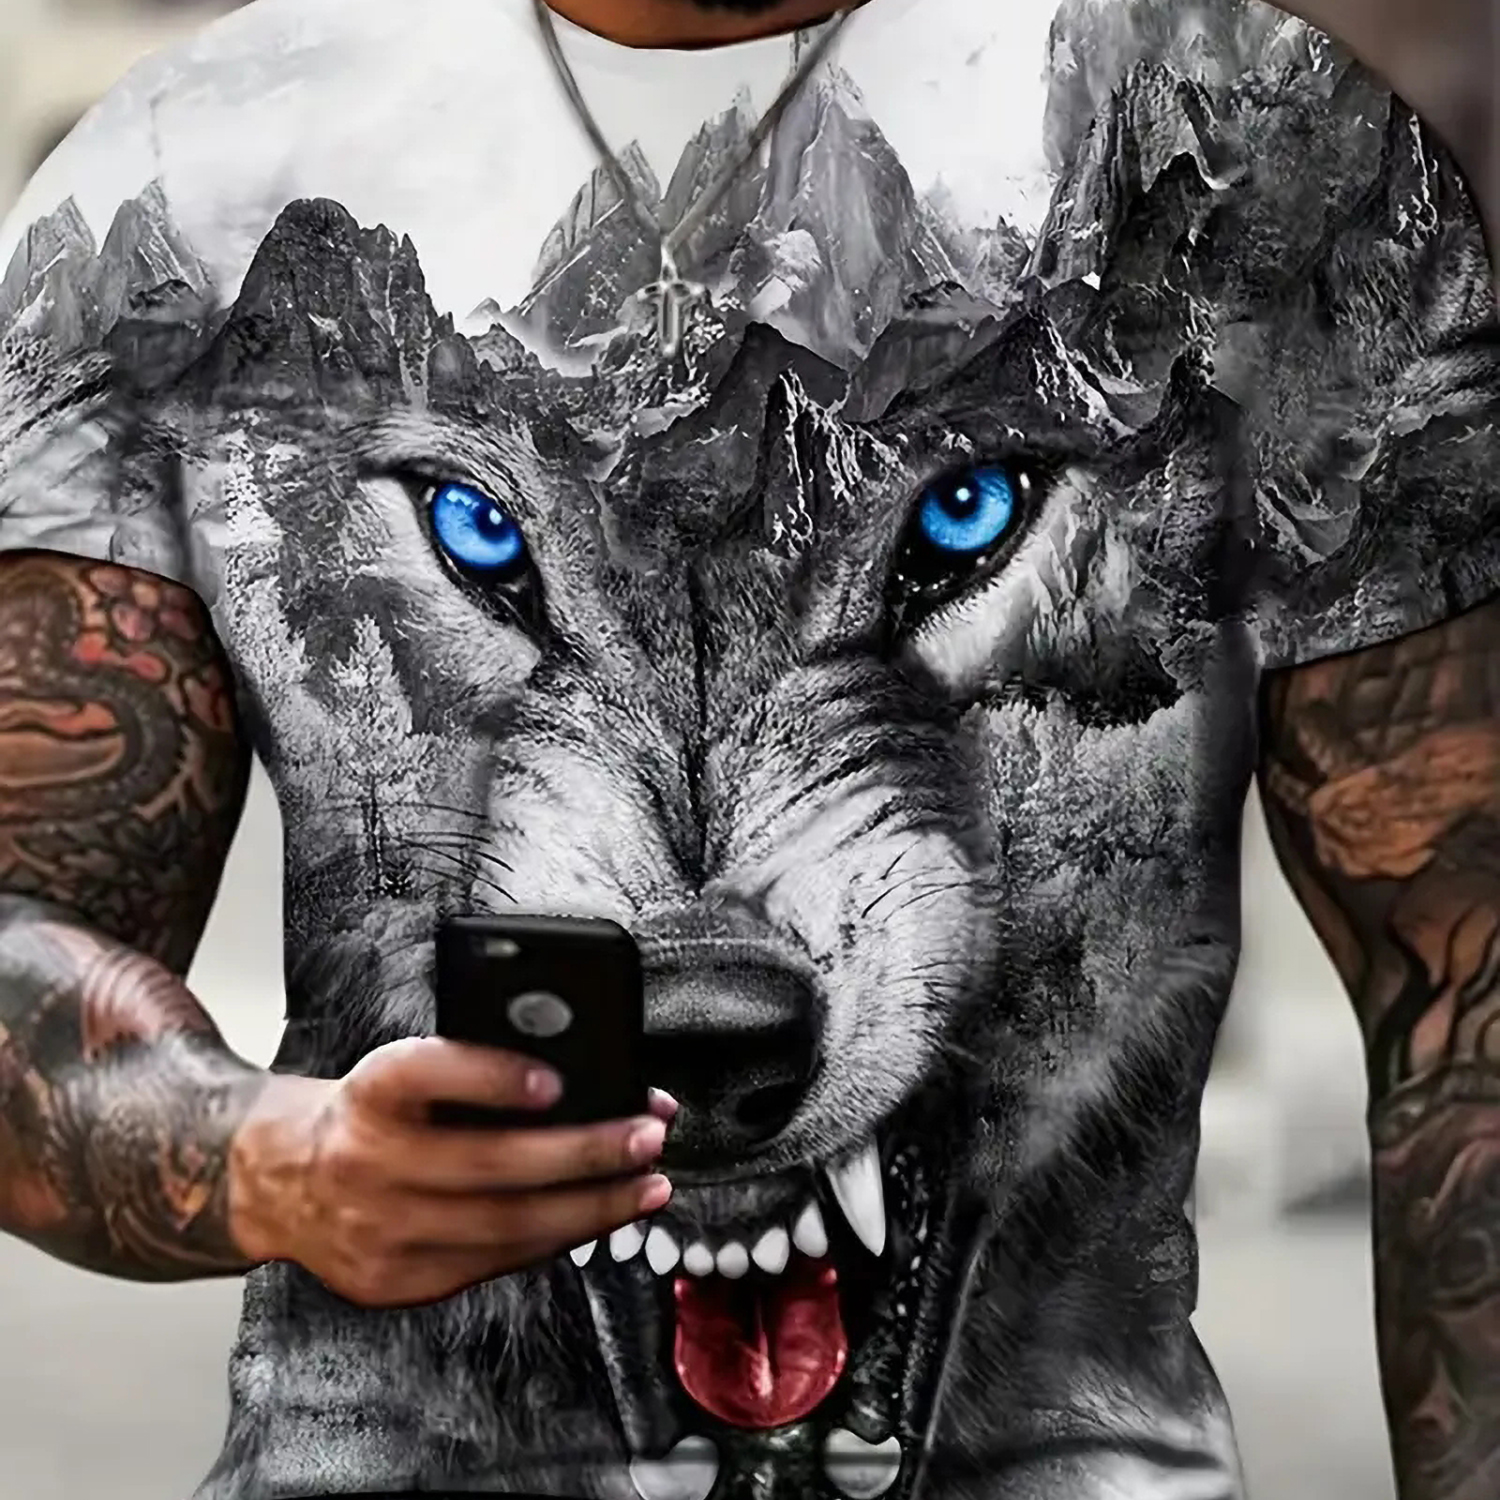 Stylish 3D Digital Mountain & Wolf Pattern Print Graphic T-shirts, Causal  Tees, Short Sleeves Comfortable Pullover Tops, Men's Summer Clothing